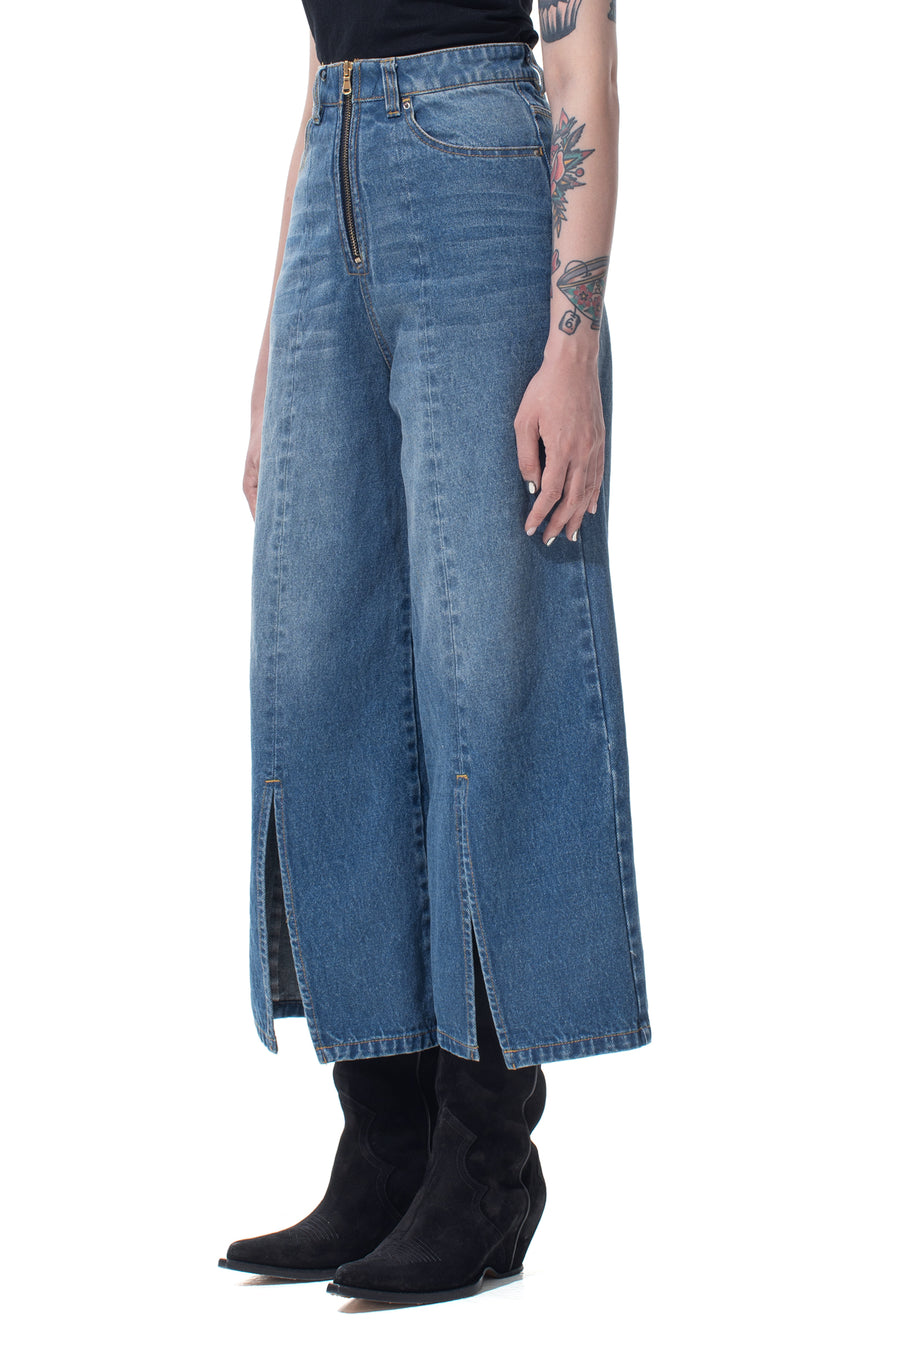 Indigo Front Vented Jeans